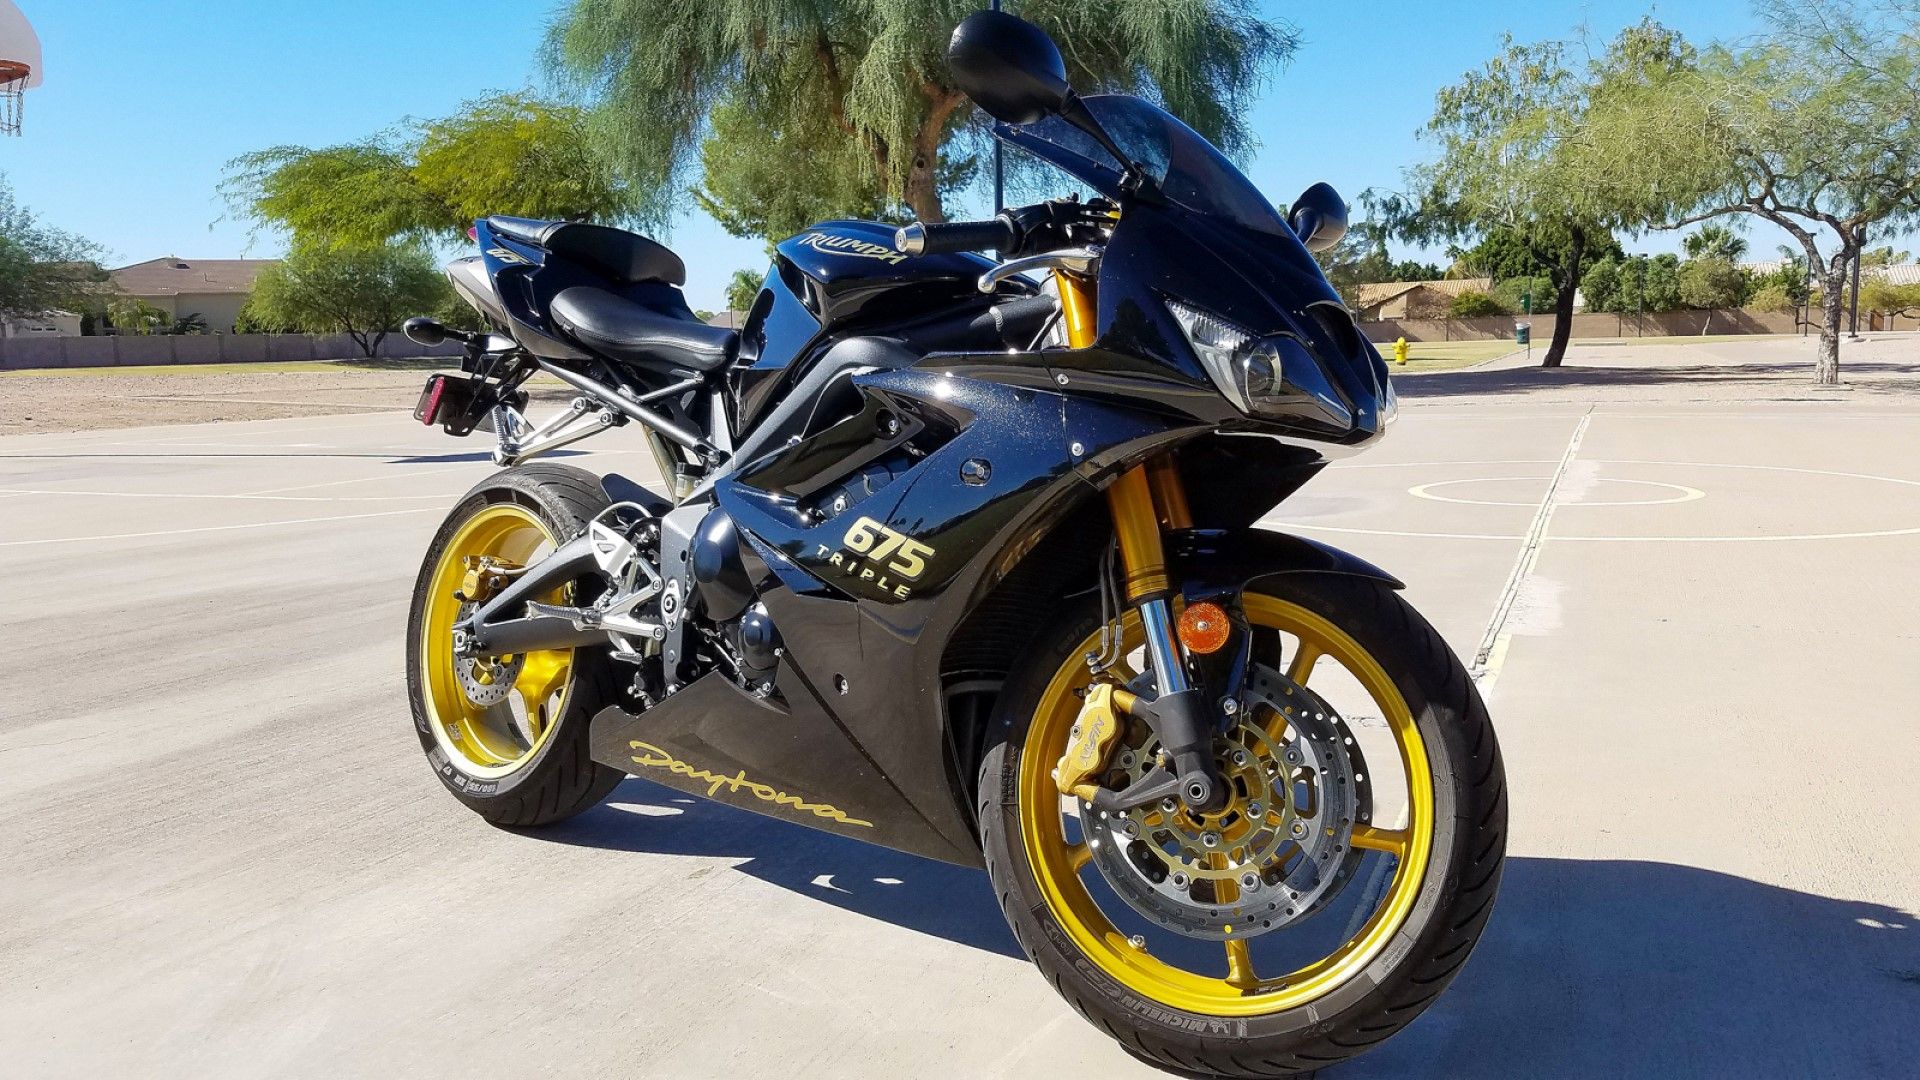 2008 Triumph Daytona 675 Special Edition in black and gold front third quarter view